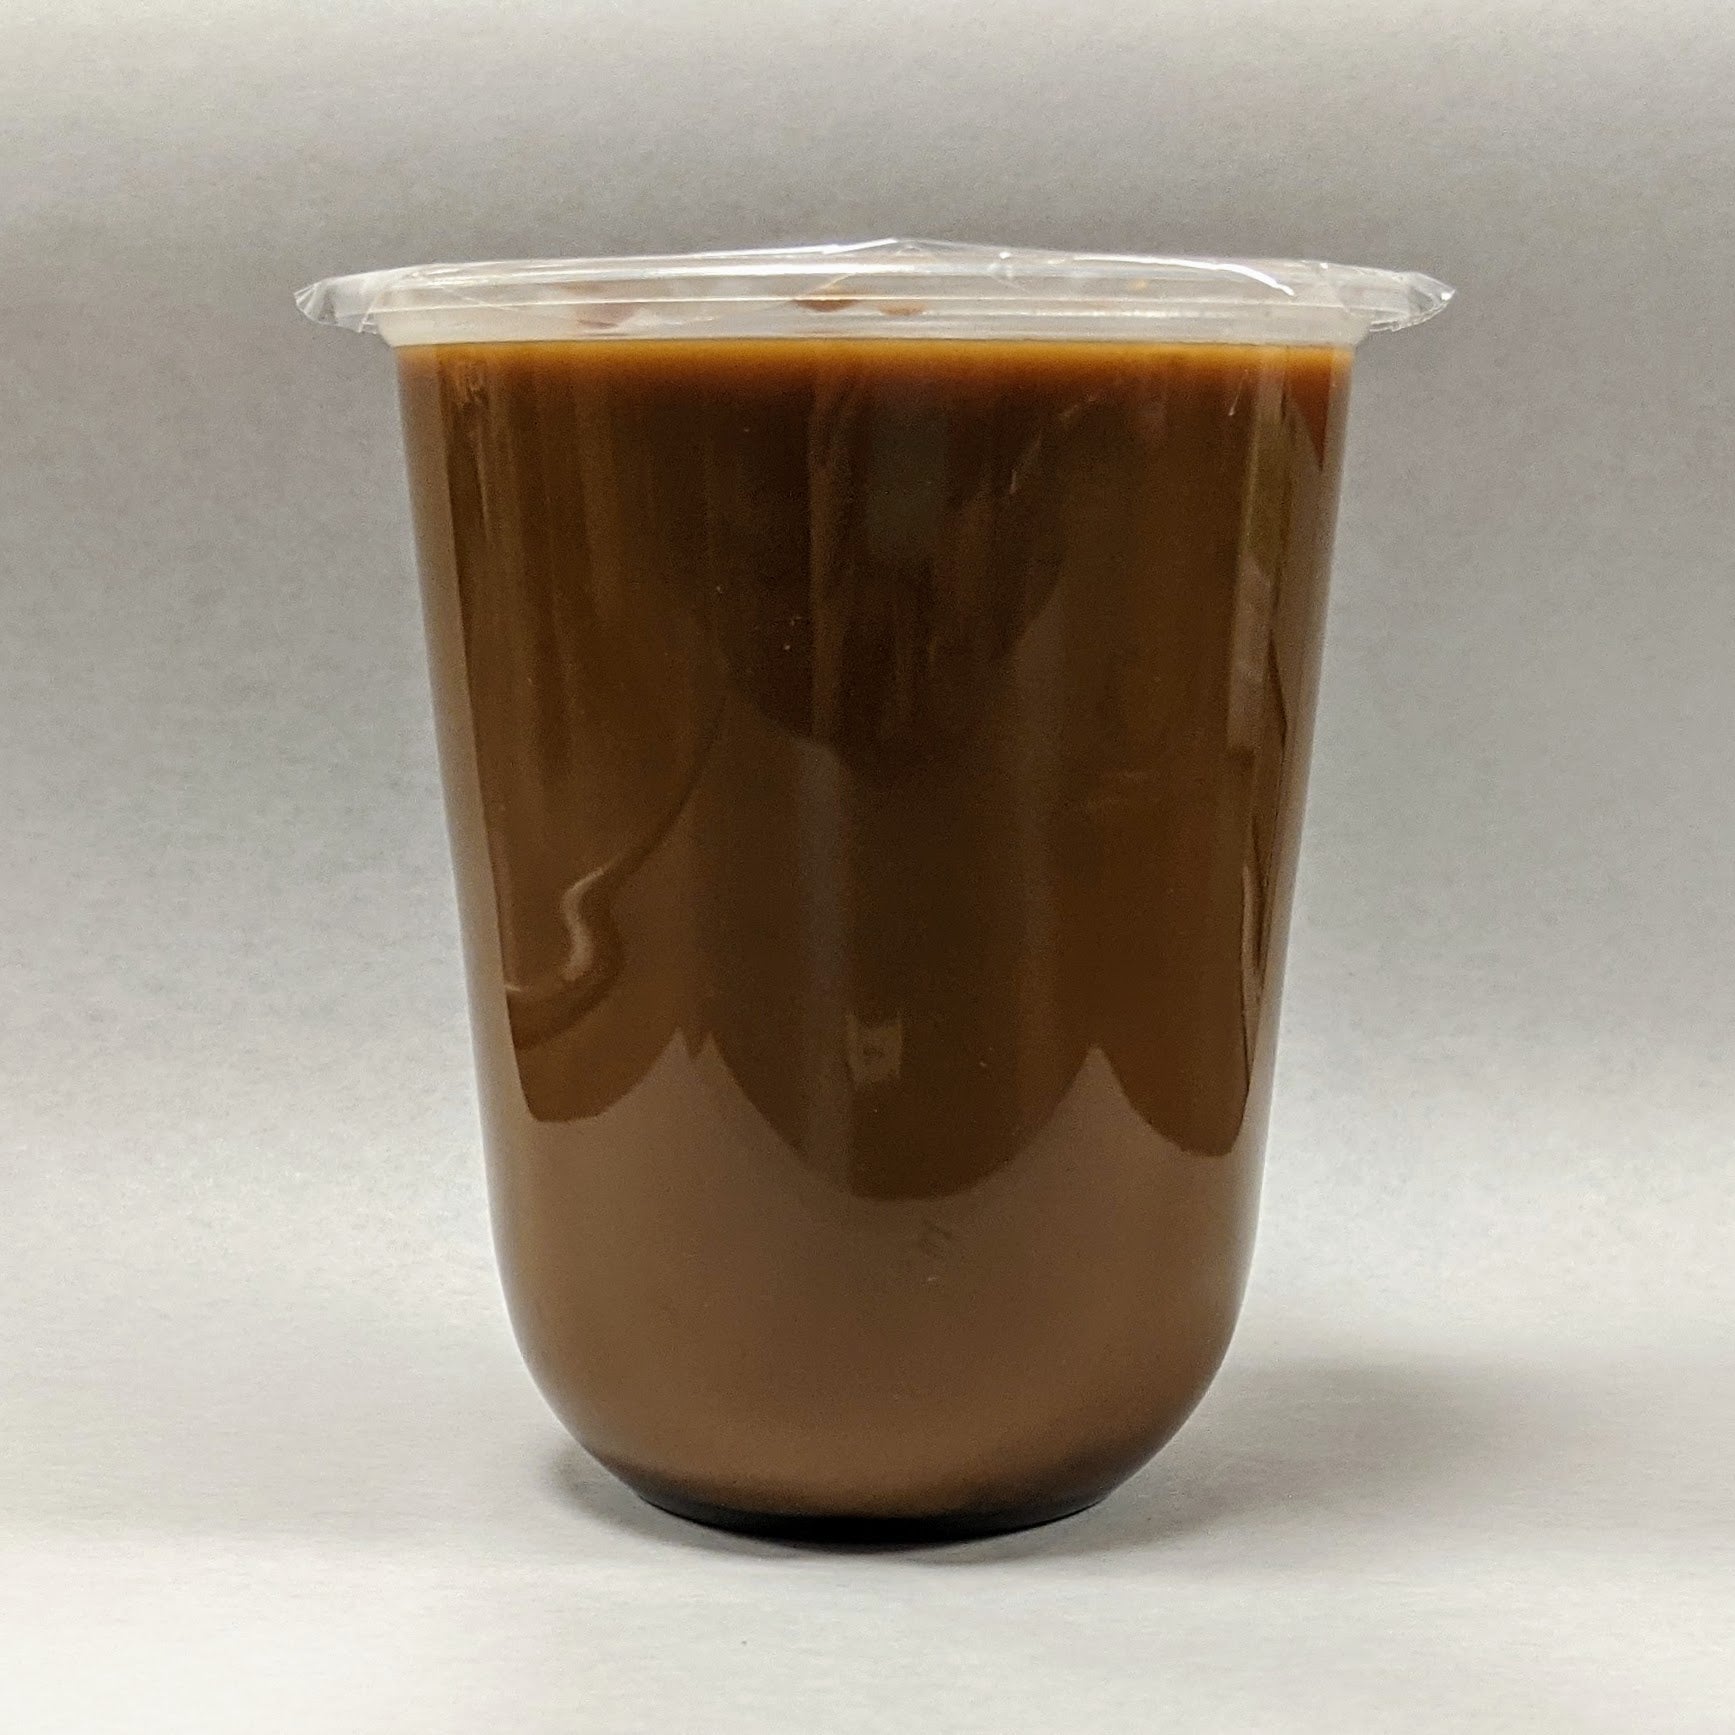 Cold-brewed Iced Boba Coffee